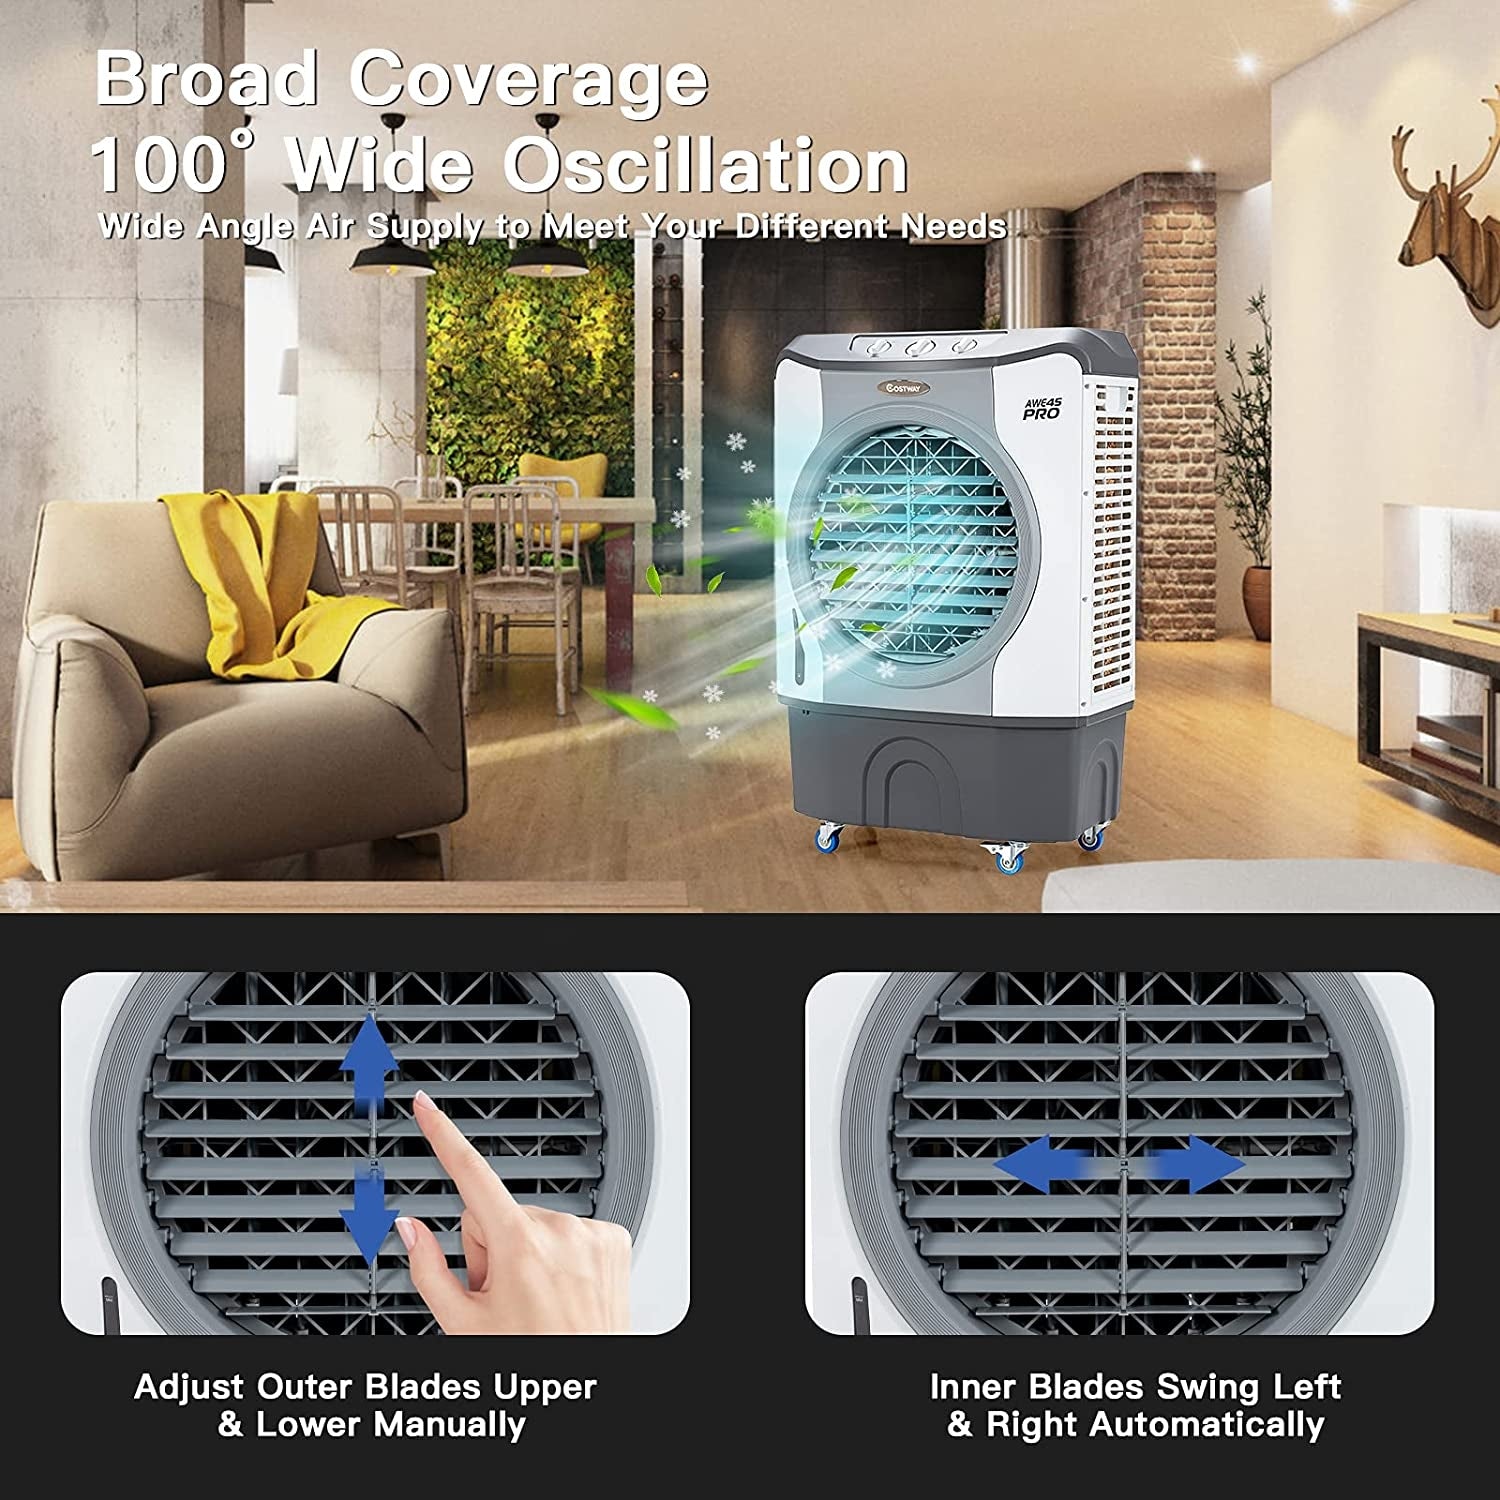 Enjoy a powerful breeze and wide coverage: Prepare to be amazed as our fan releases an astonishing airflow of up to 9740 cfm, capable of cooling an impressive 1800 Sq. ft area. Choose from three wind speeds and adjust the louvers to your preference. With a 100° oscillation angle, our fan ensures broad coverage for a refreshing airflow in every direction.